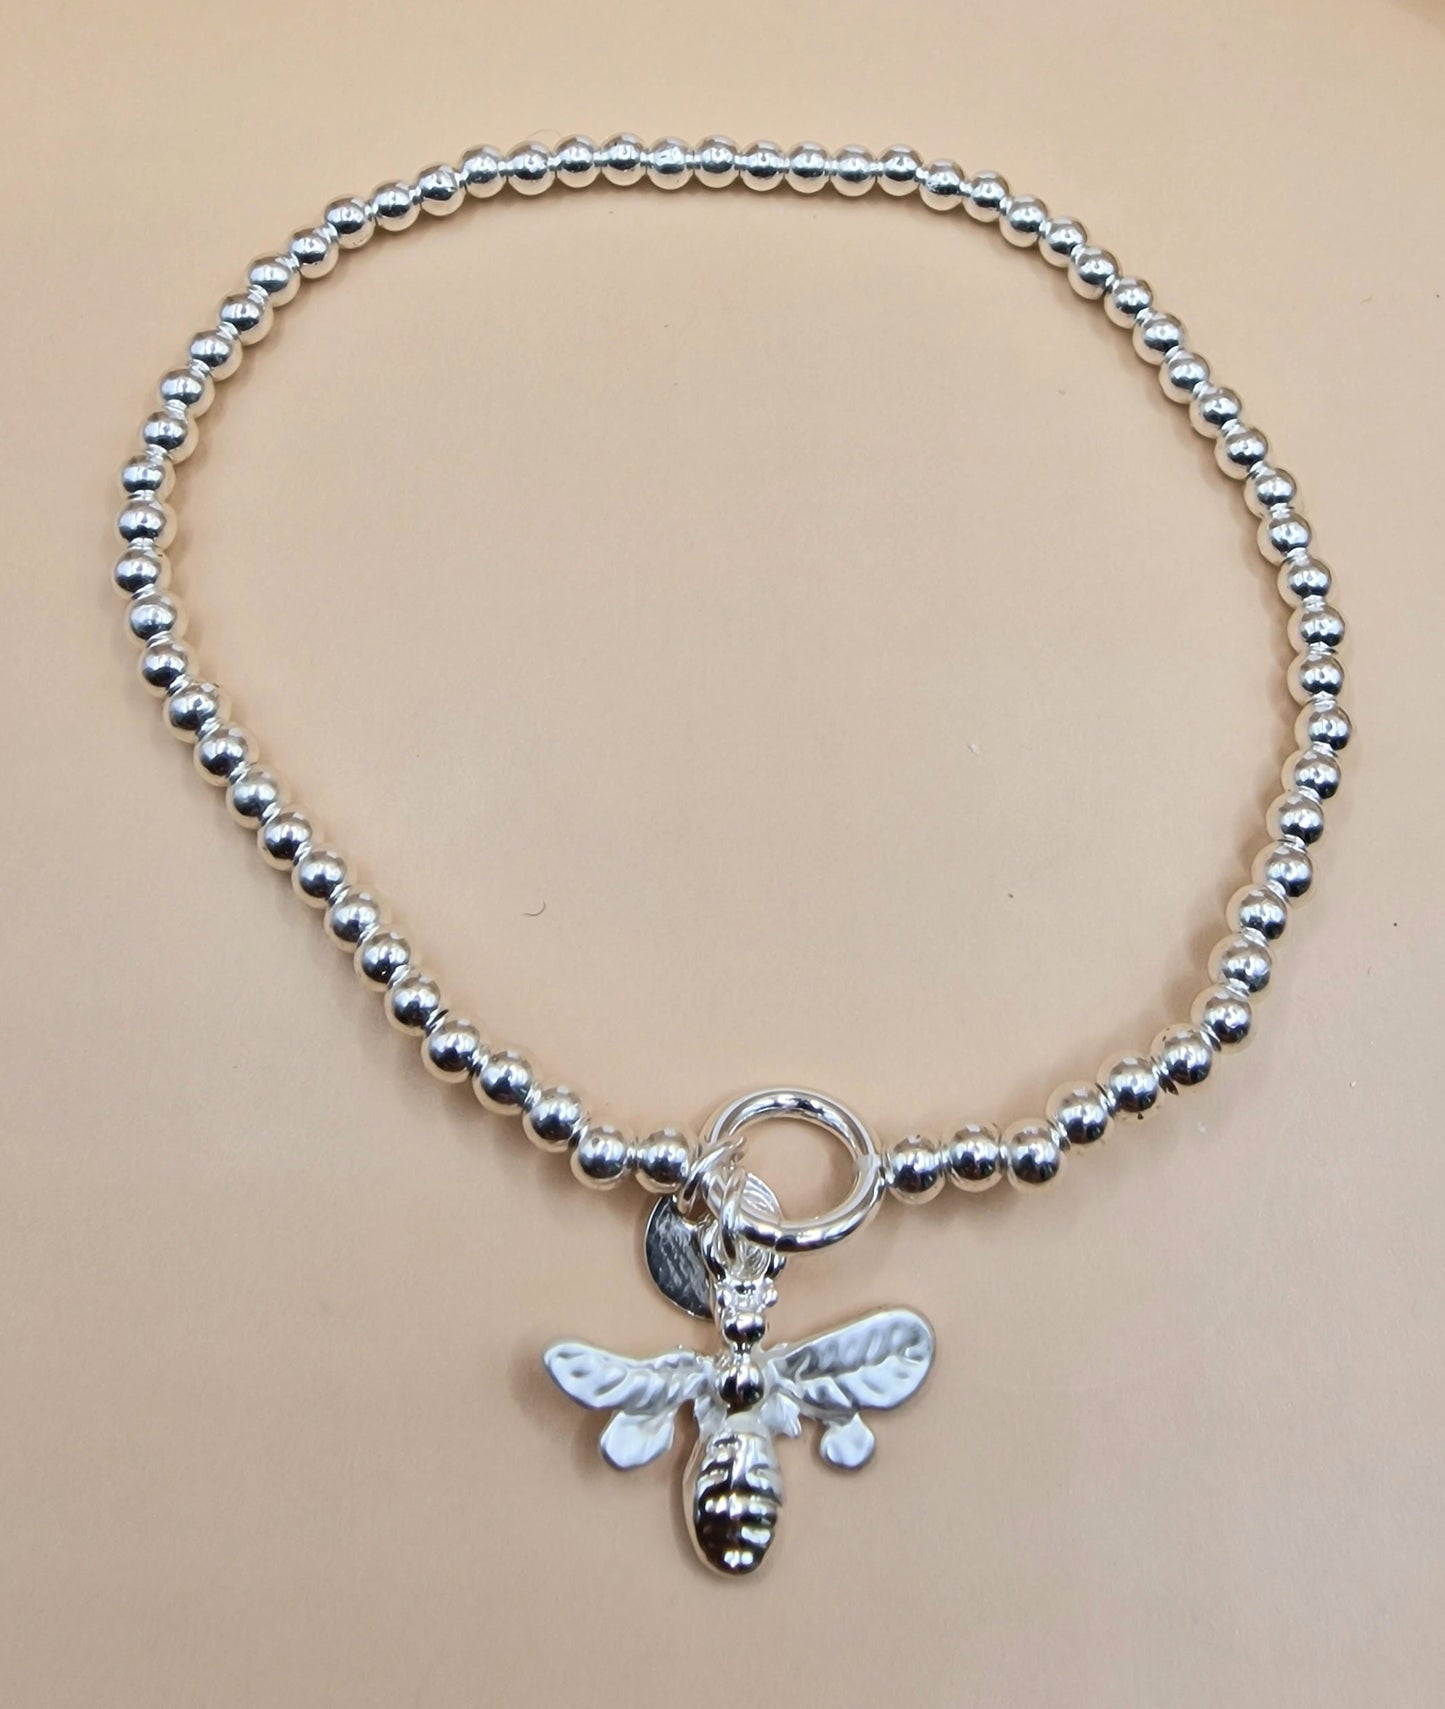 Delicate Bumble Bee Stretch Charm Bracelet Silver